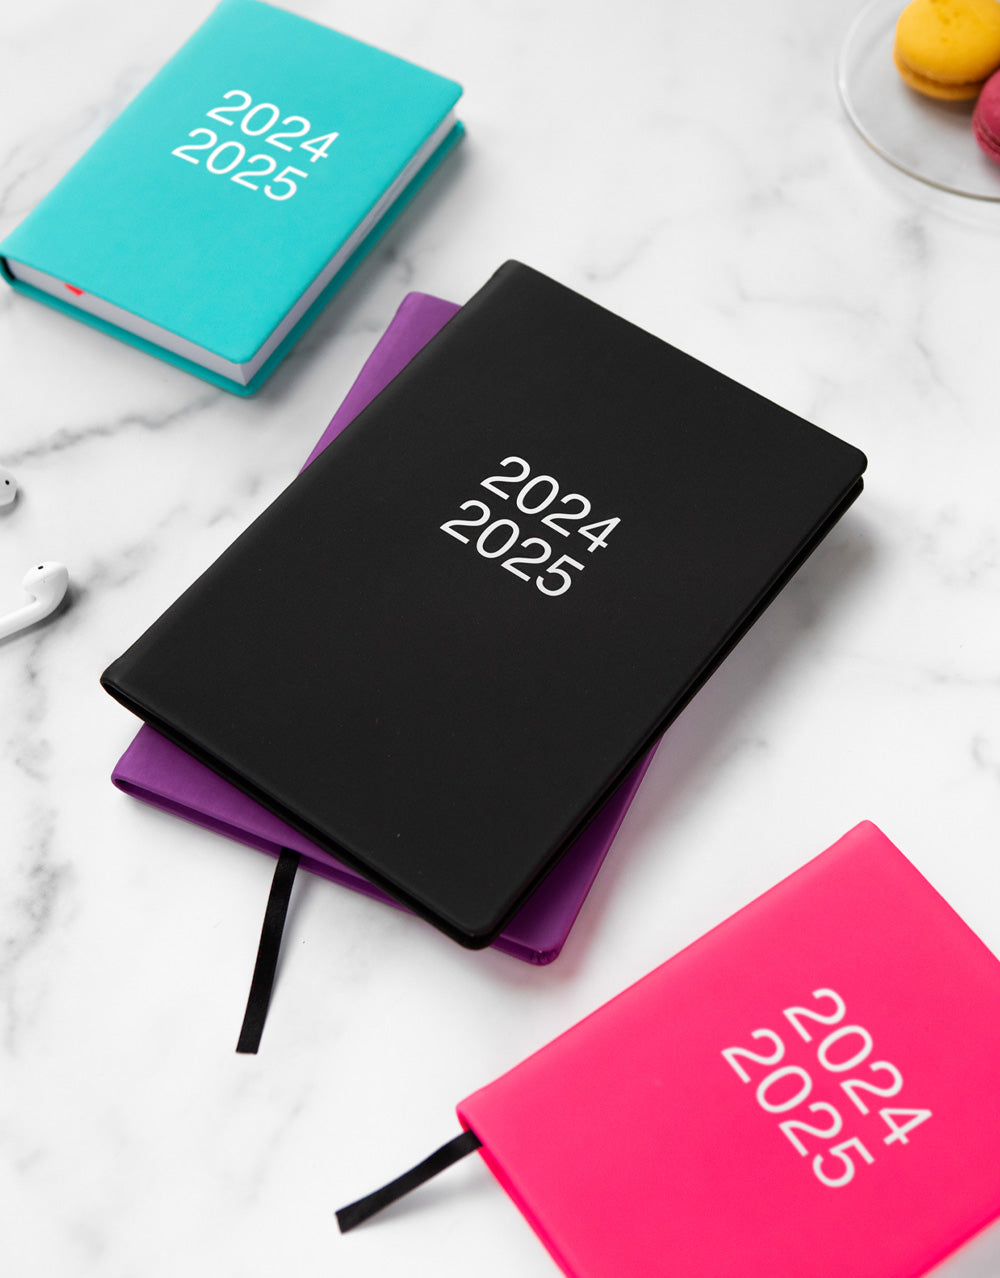 Dazzle A5 Week to View Diary 2024-2025 - Multilanguage#colour_black